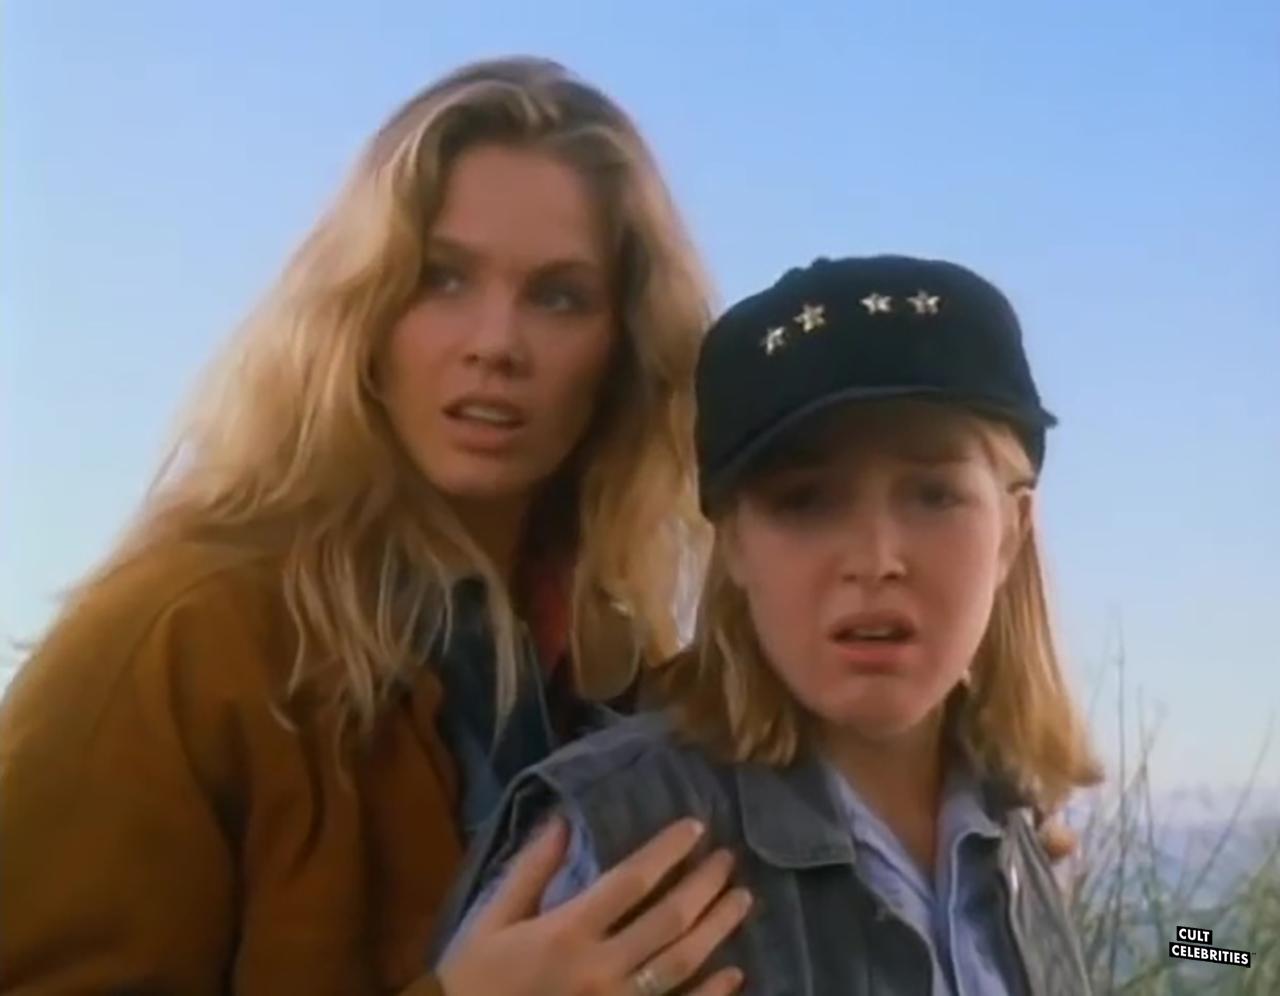 Andrea Roth in Seedpeople (1992)